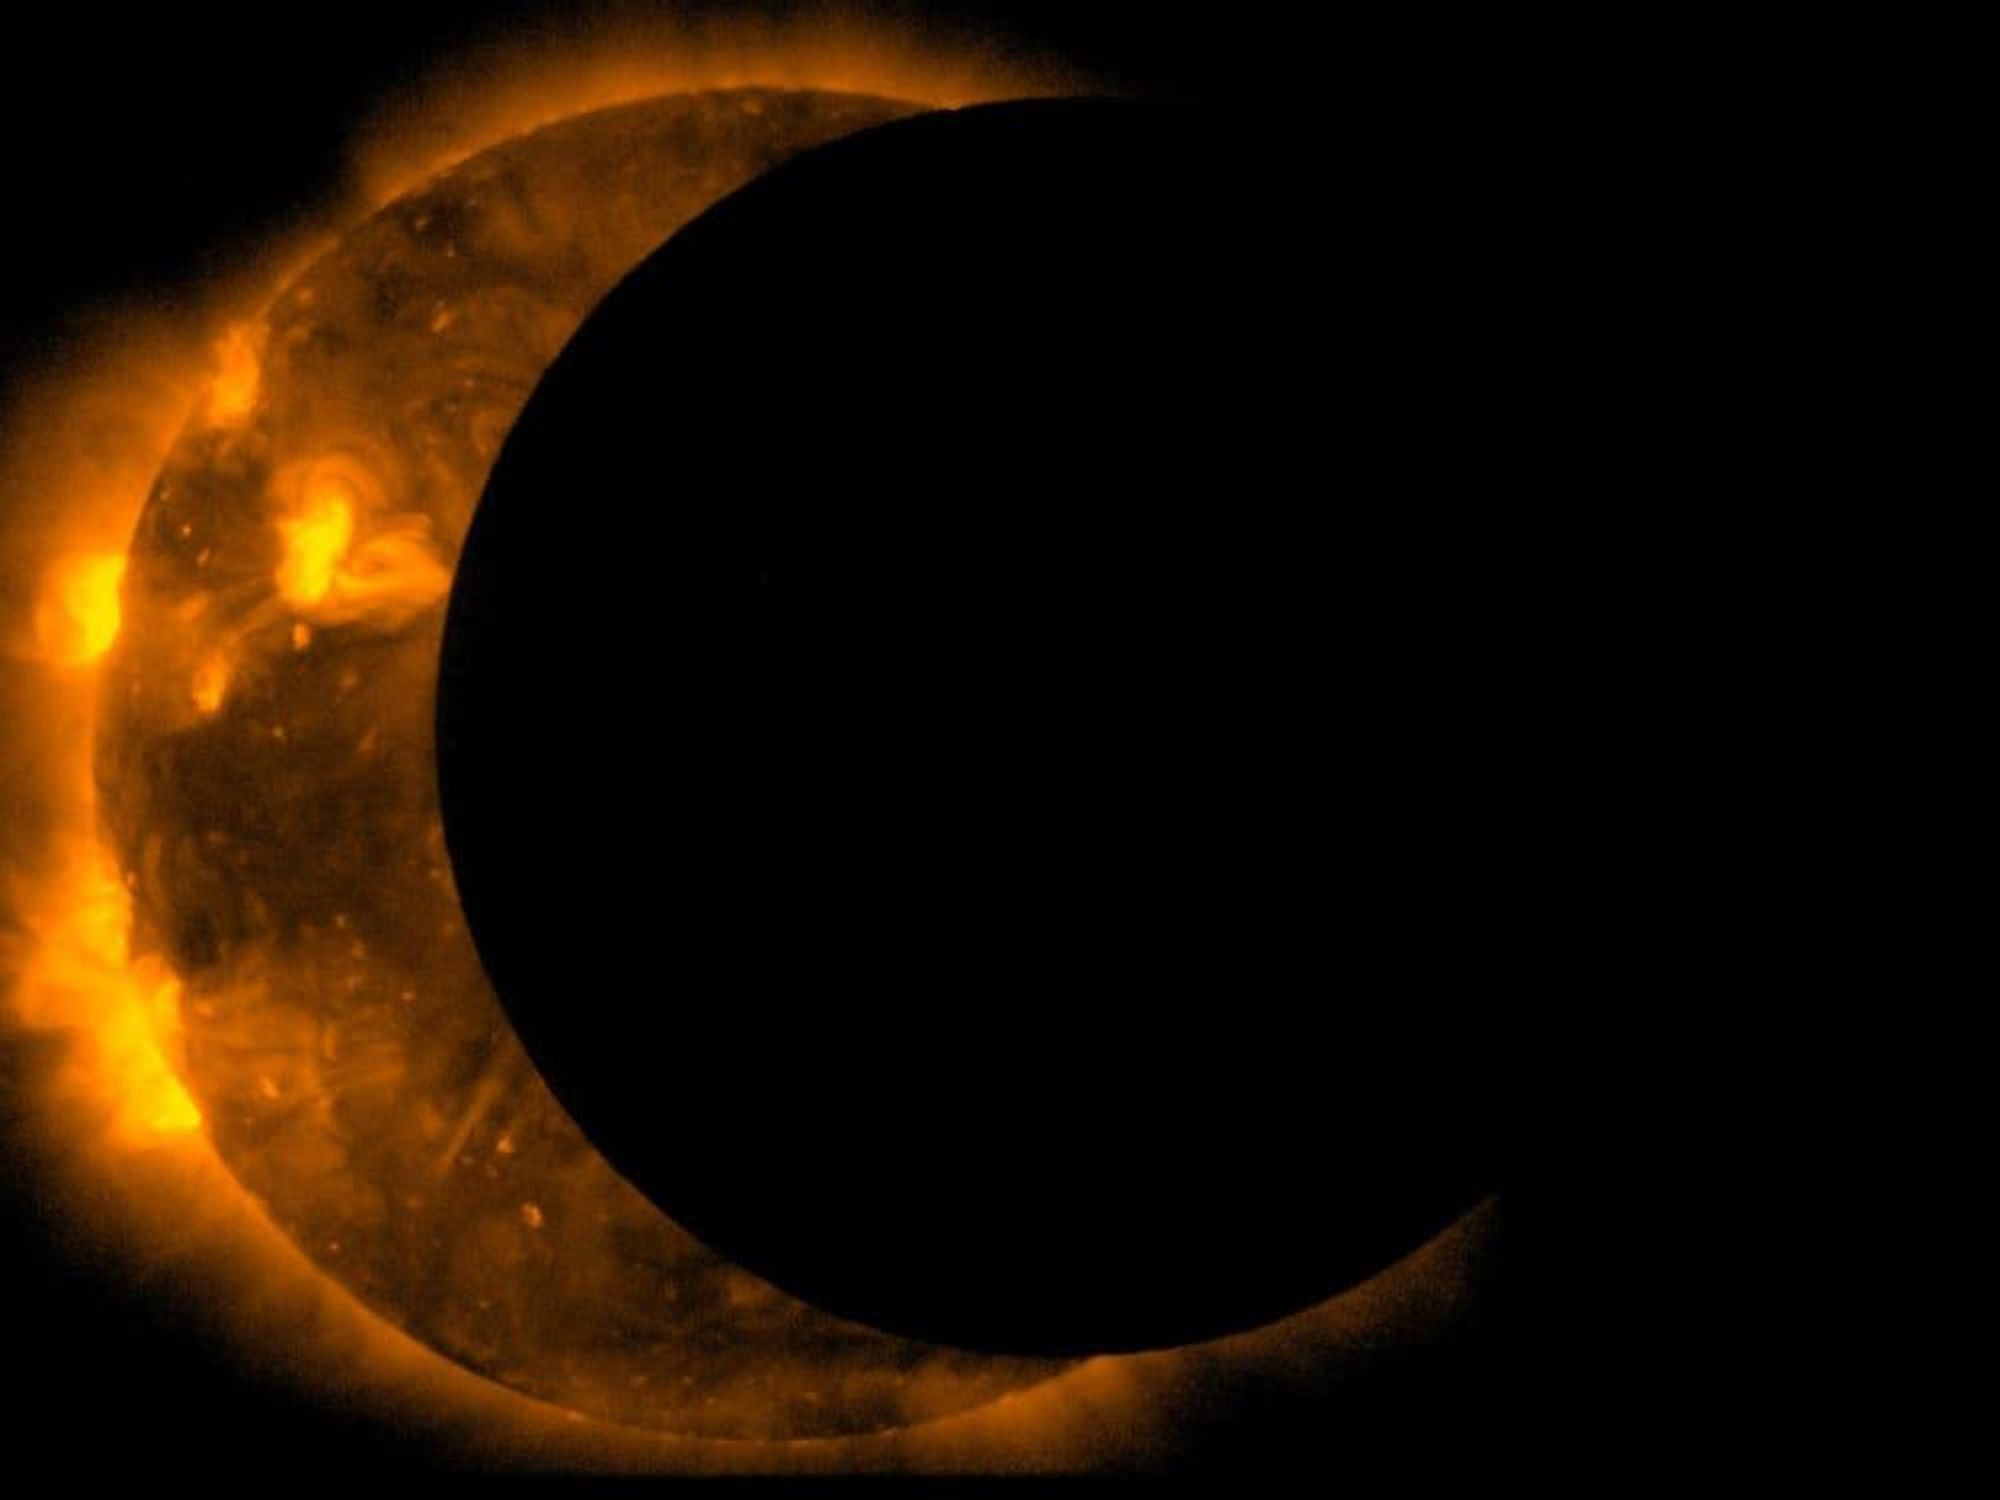 Lunar and Planetary Institute presents #EclipseOverHouston viewing